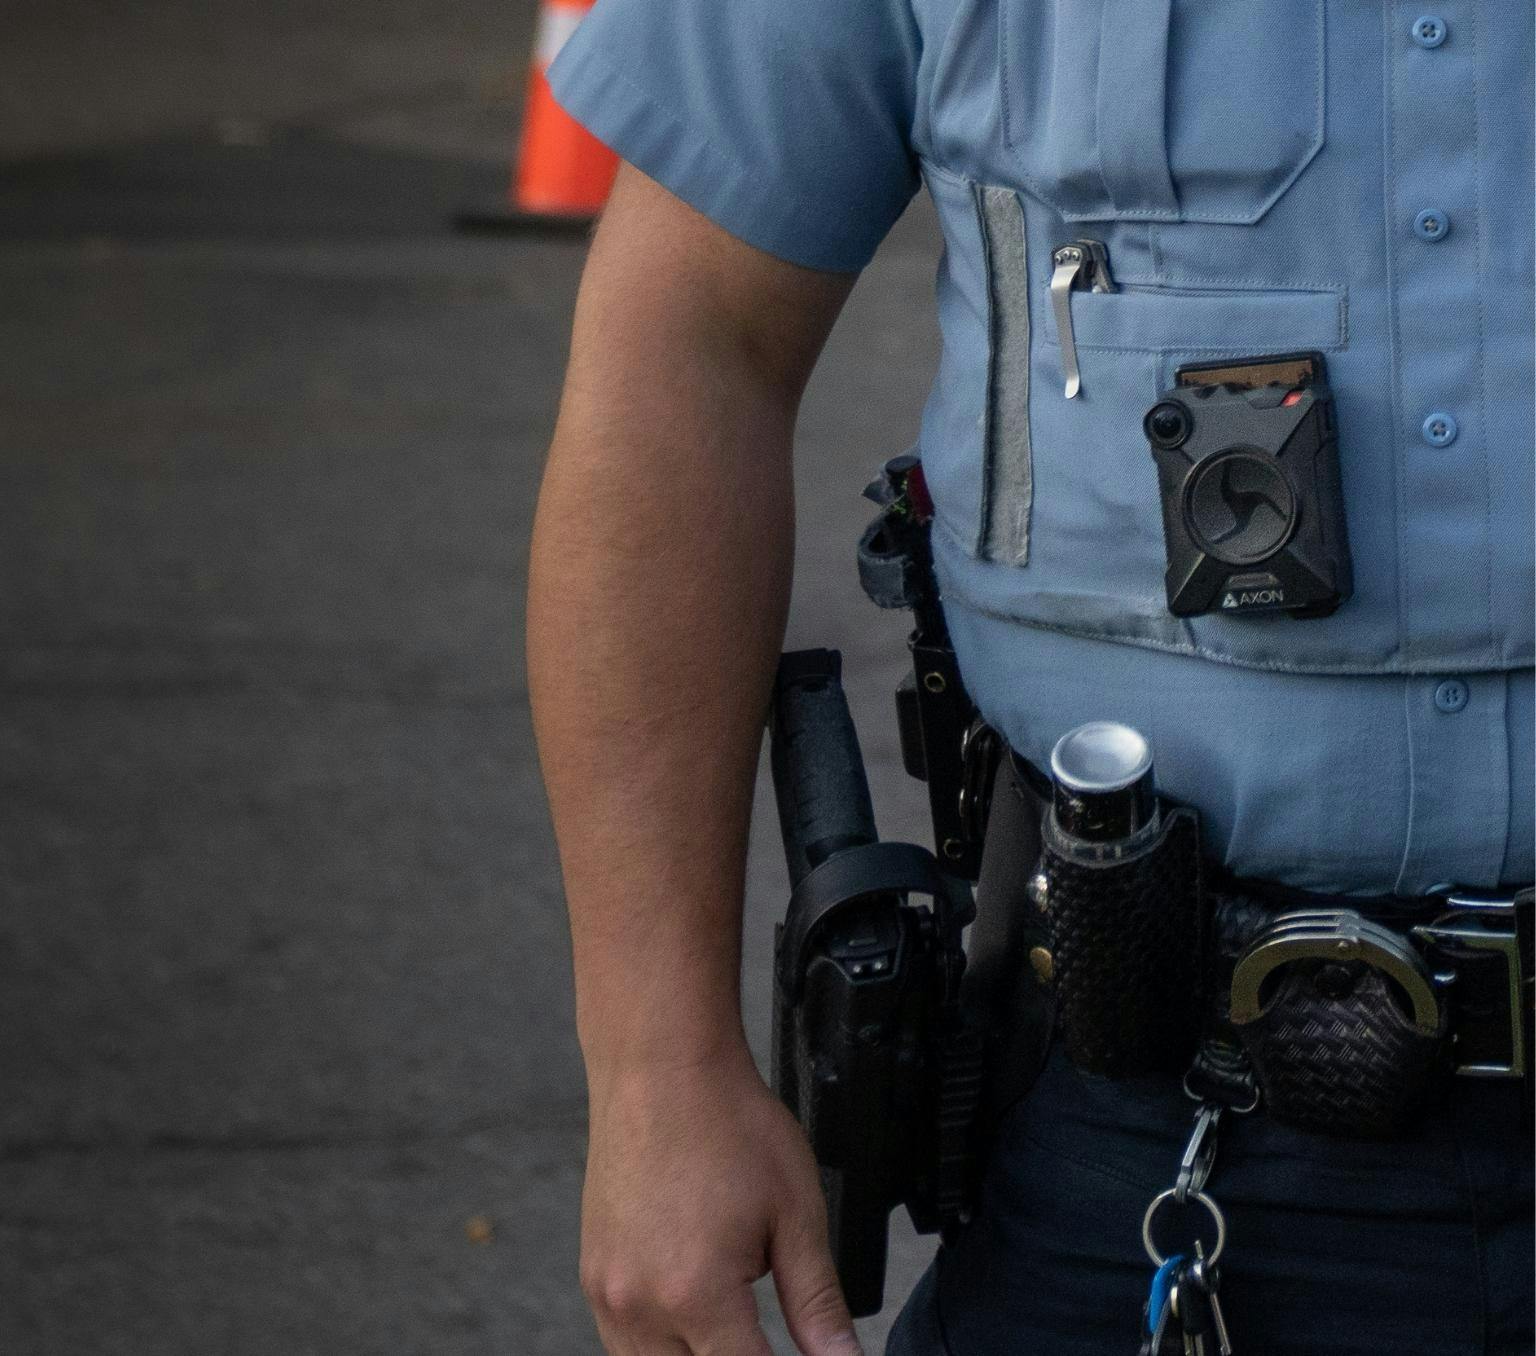 A police officer wearing a body camera. You can not identify the police officer and the image only shows from the shoulders down